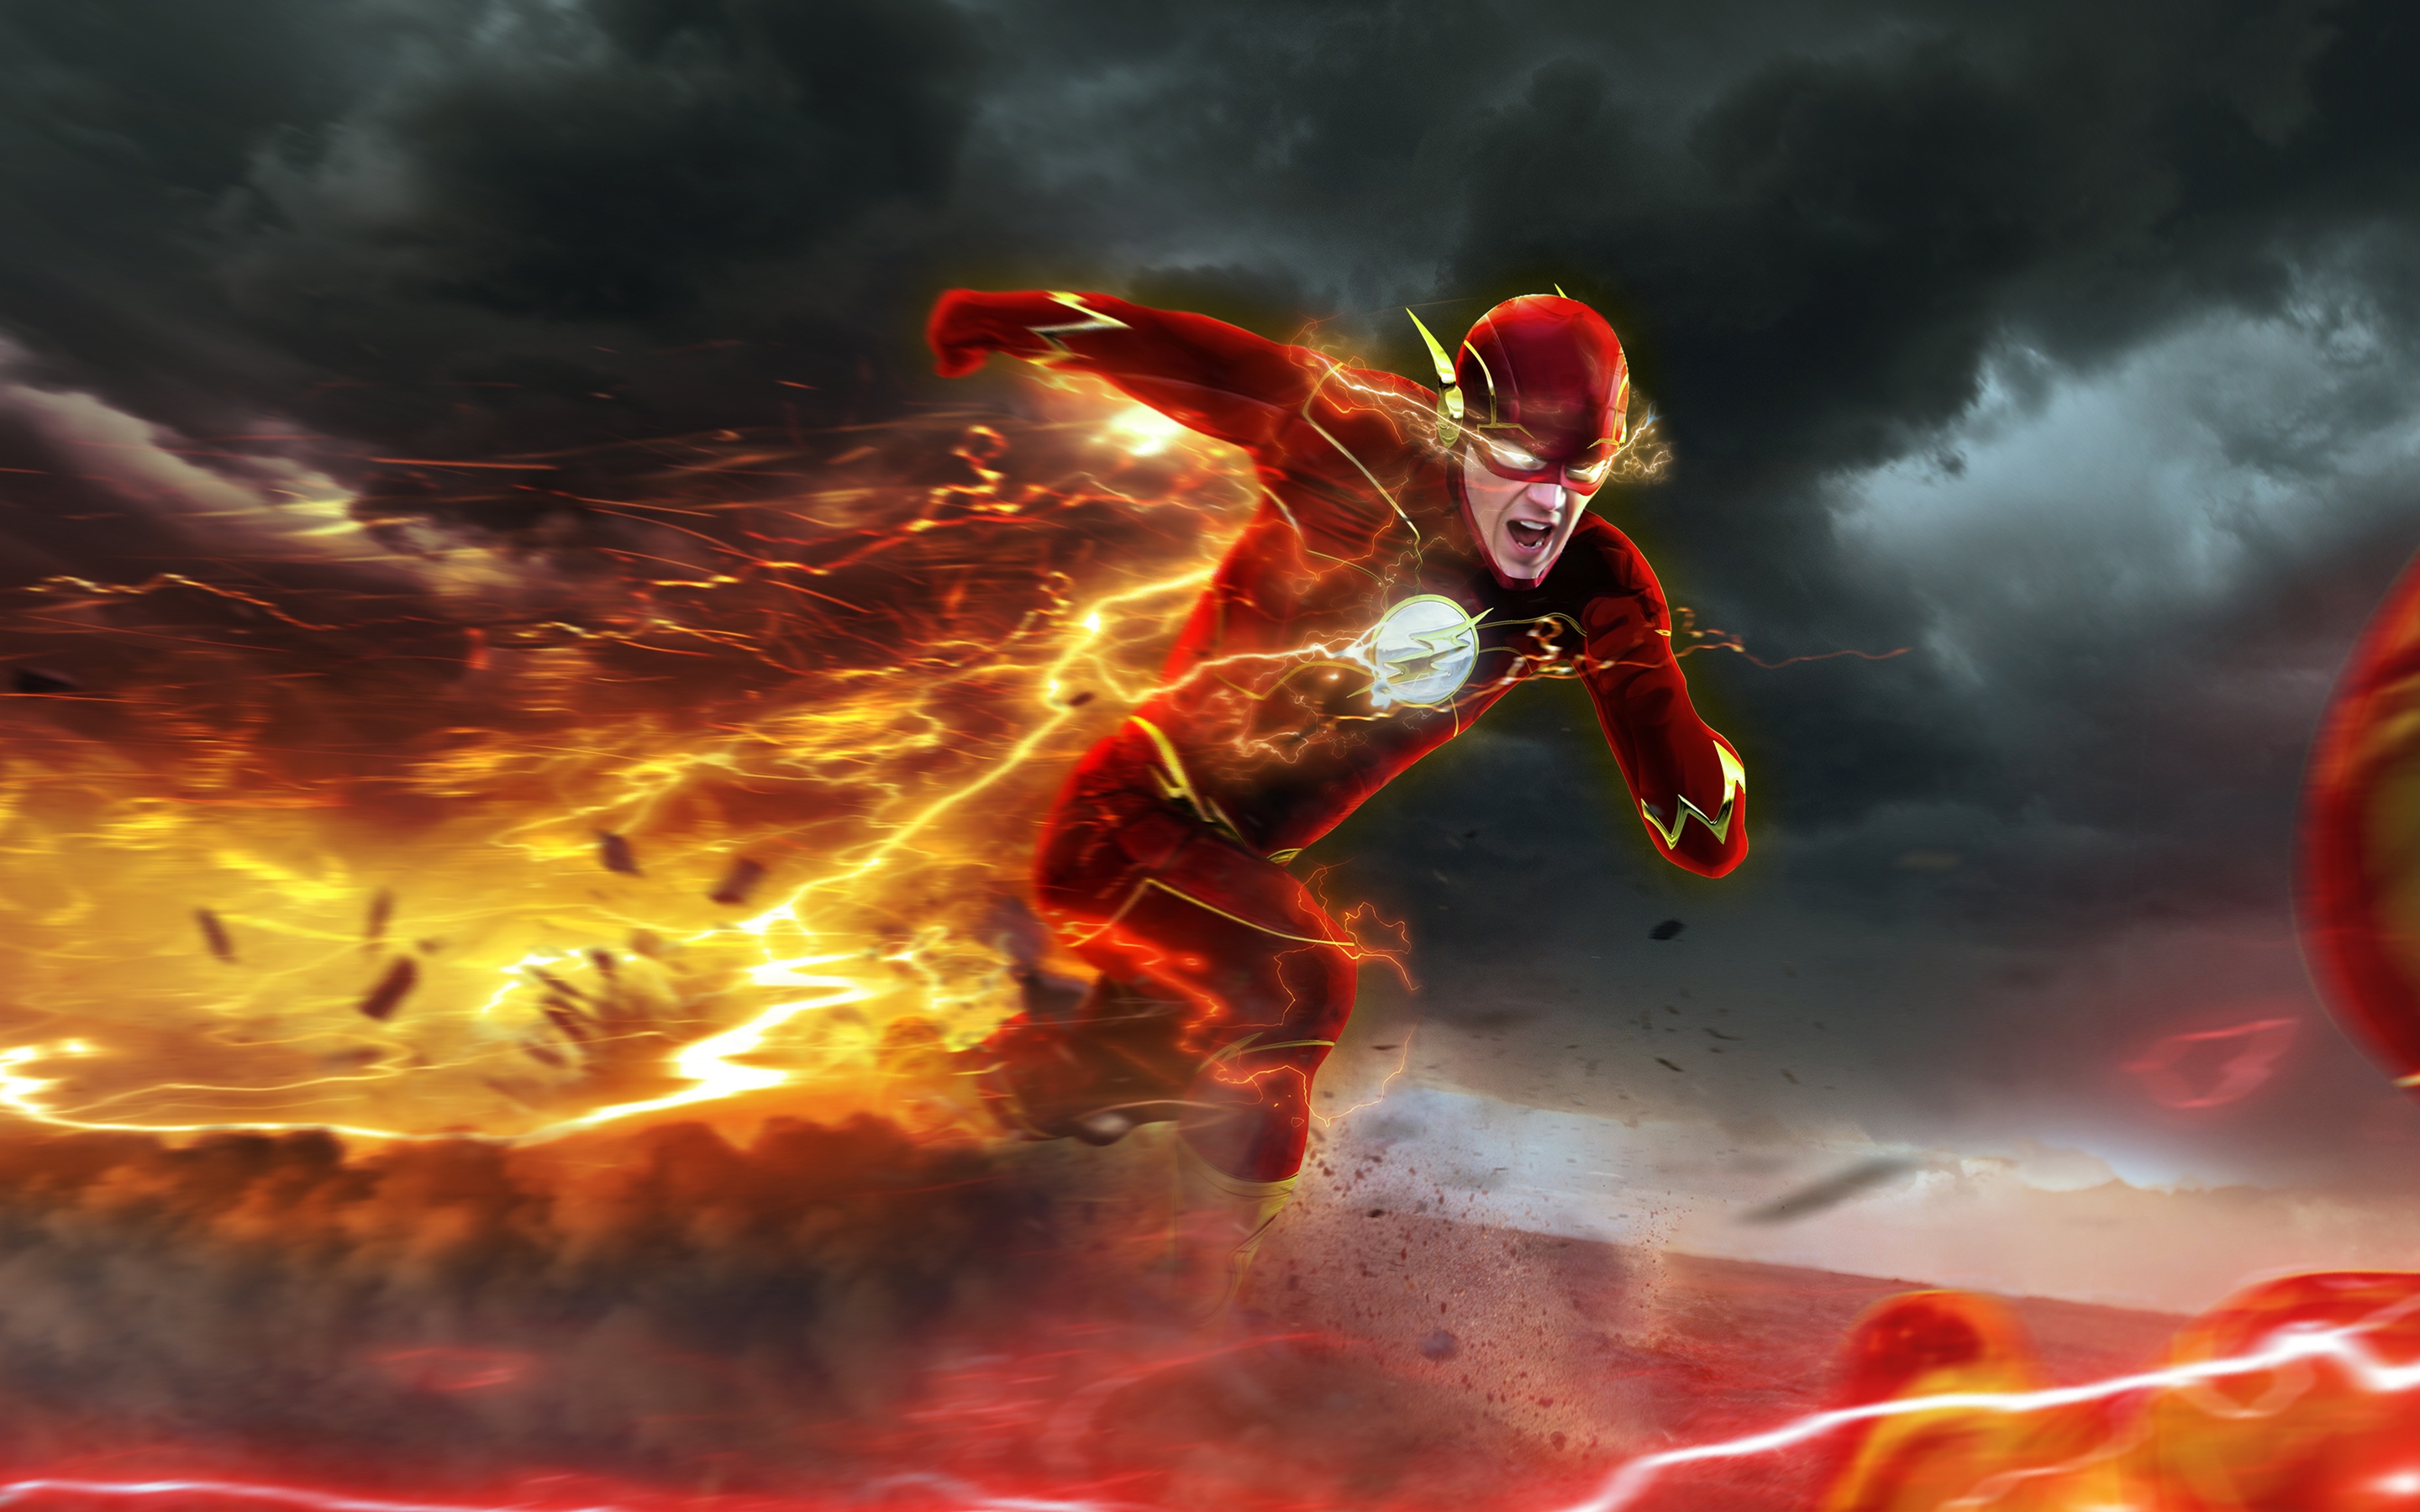 Barry Wallpapers